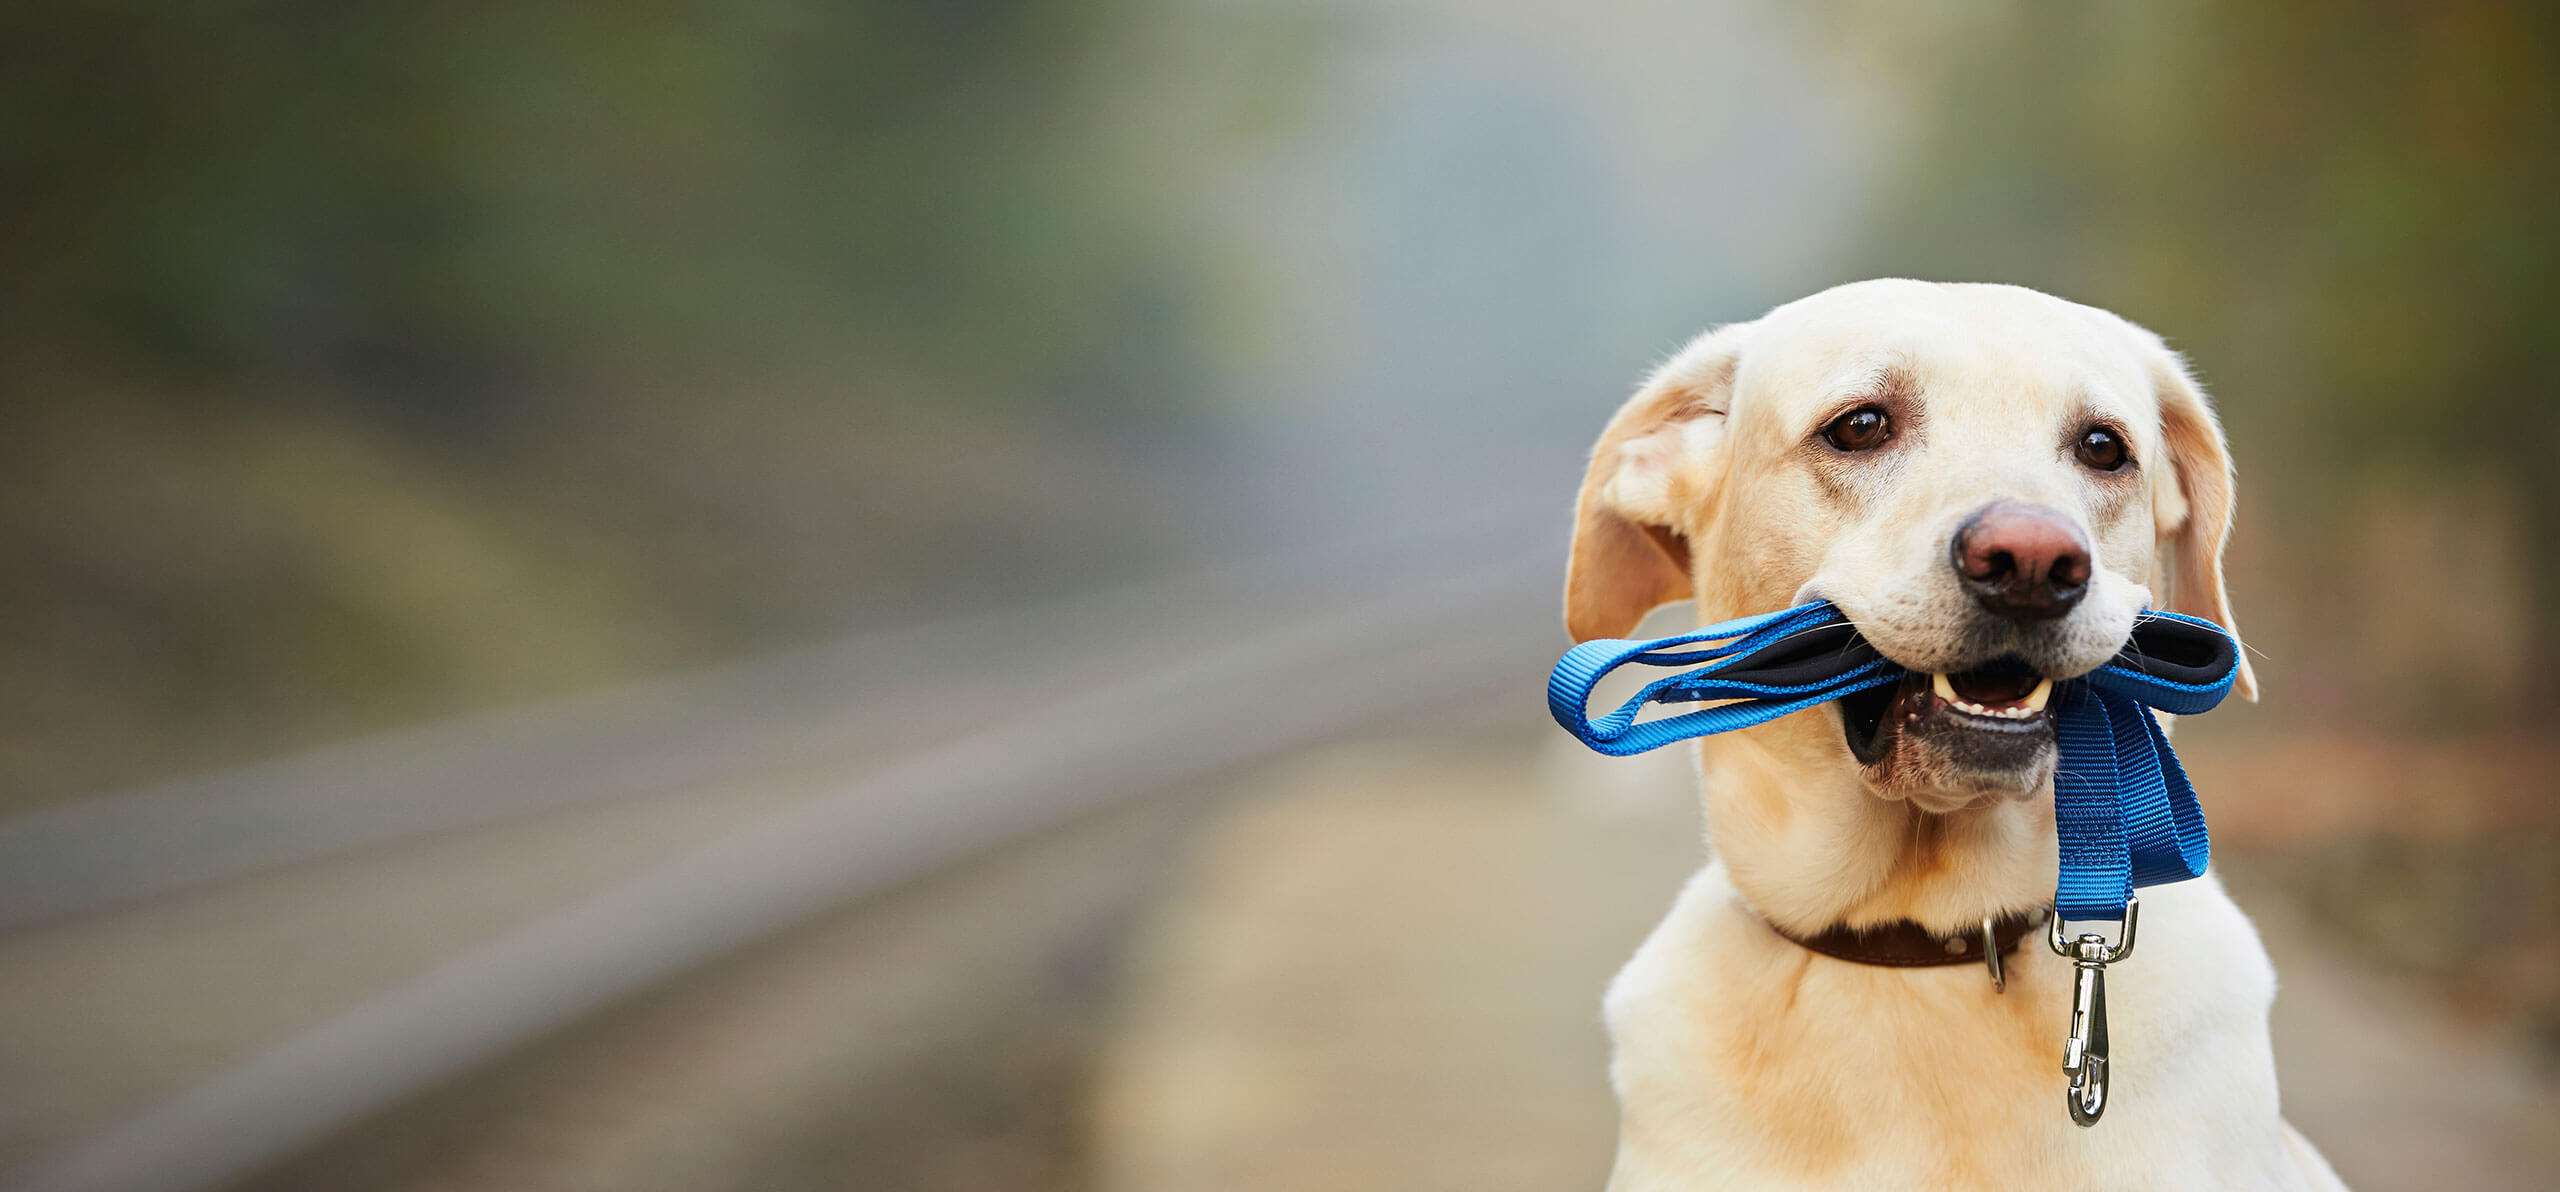 dog holding a leash in its mouth